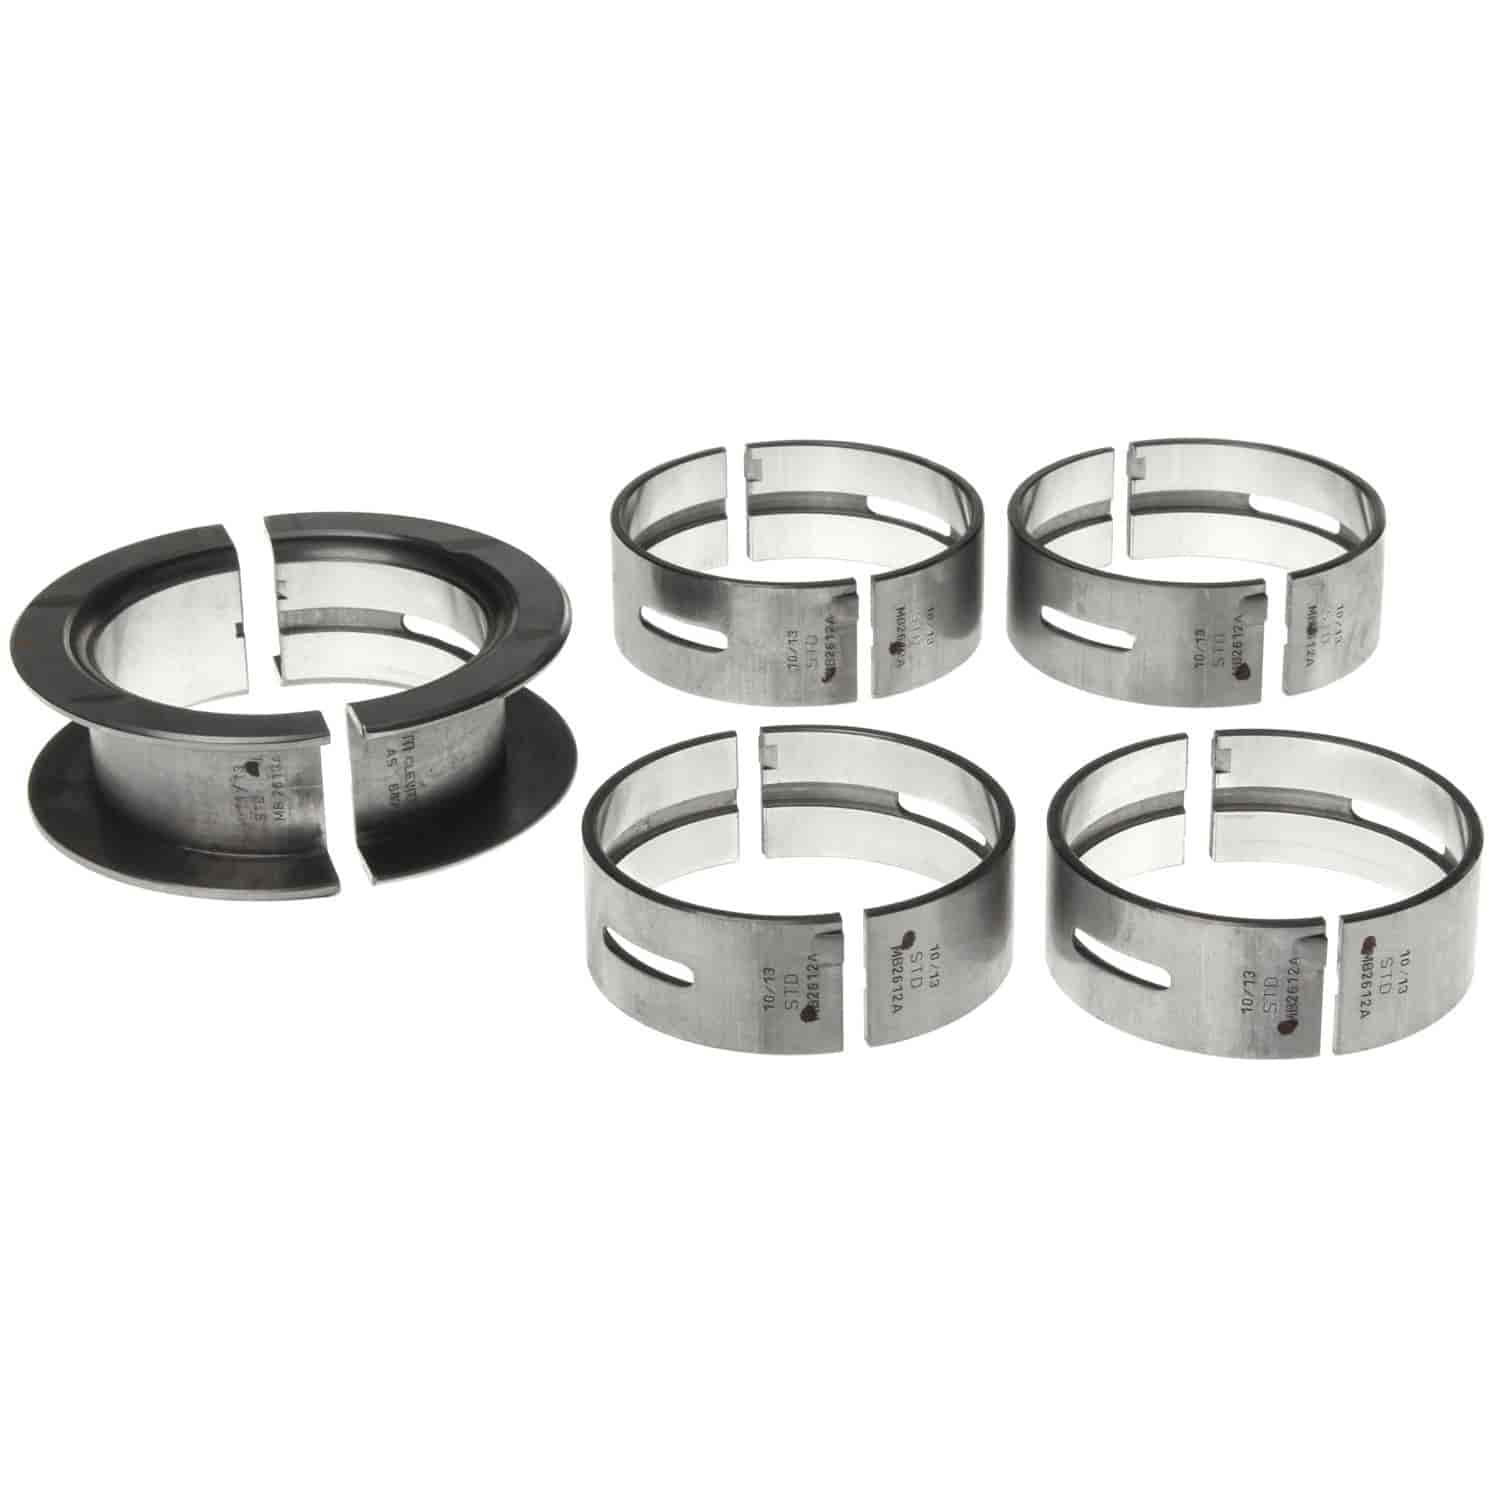 Main Bearing Set Ford 1974-1997 L4 2.0/2.3L with